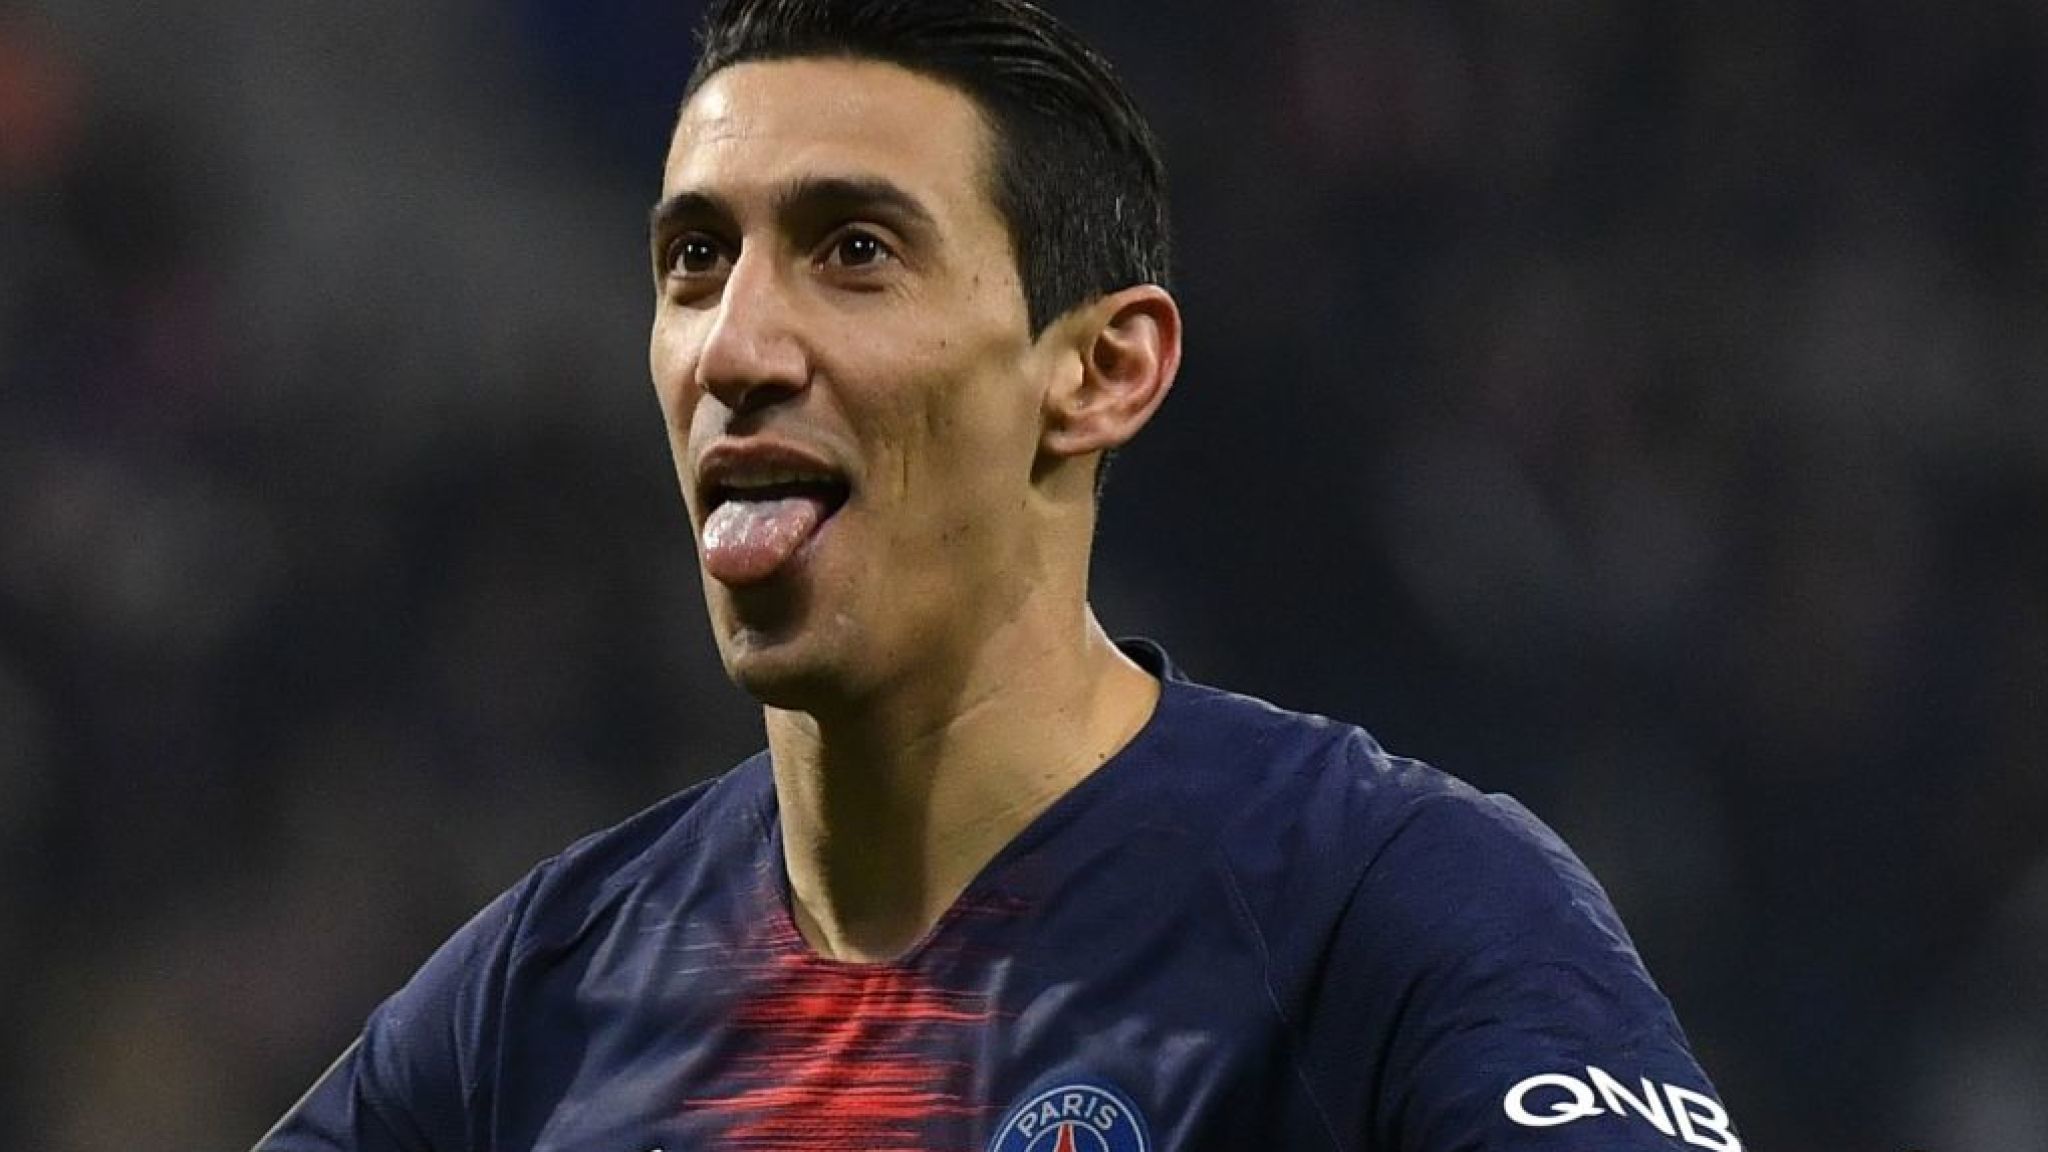 Di Maria Scored Twice For Psg On Sunday - Player - HD Wallpaper 